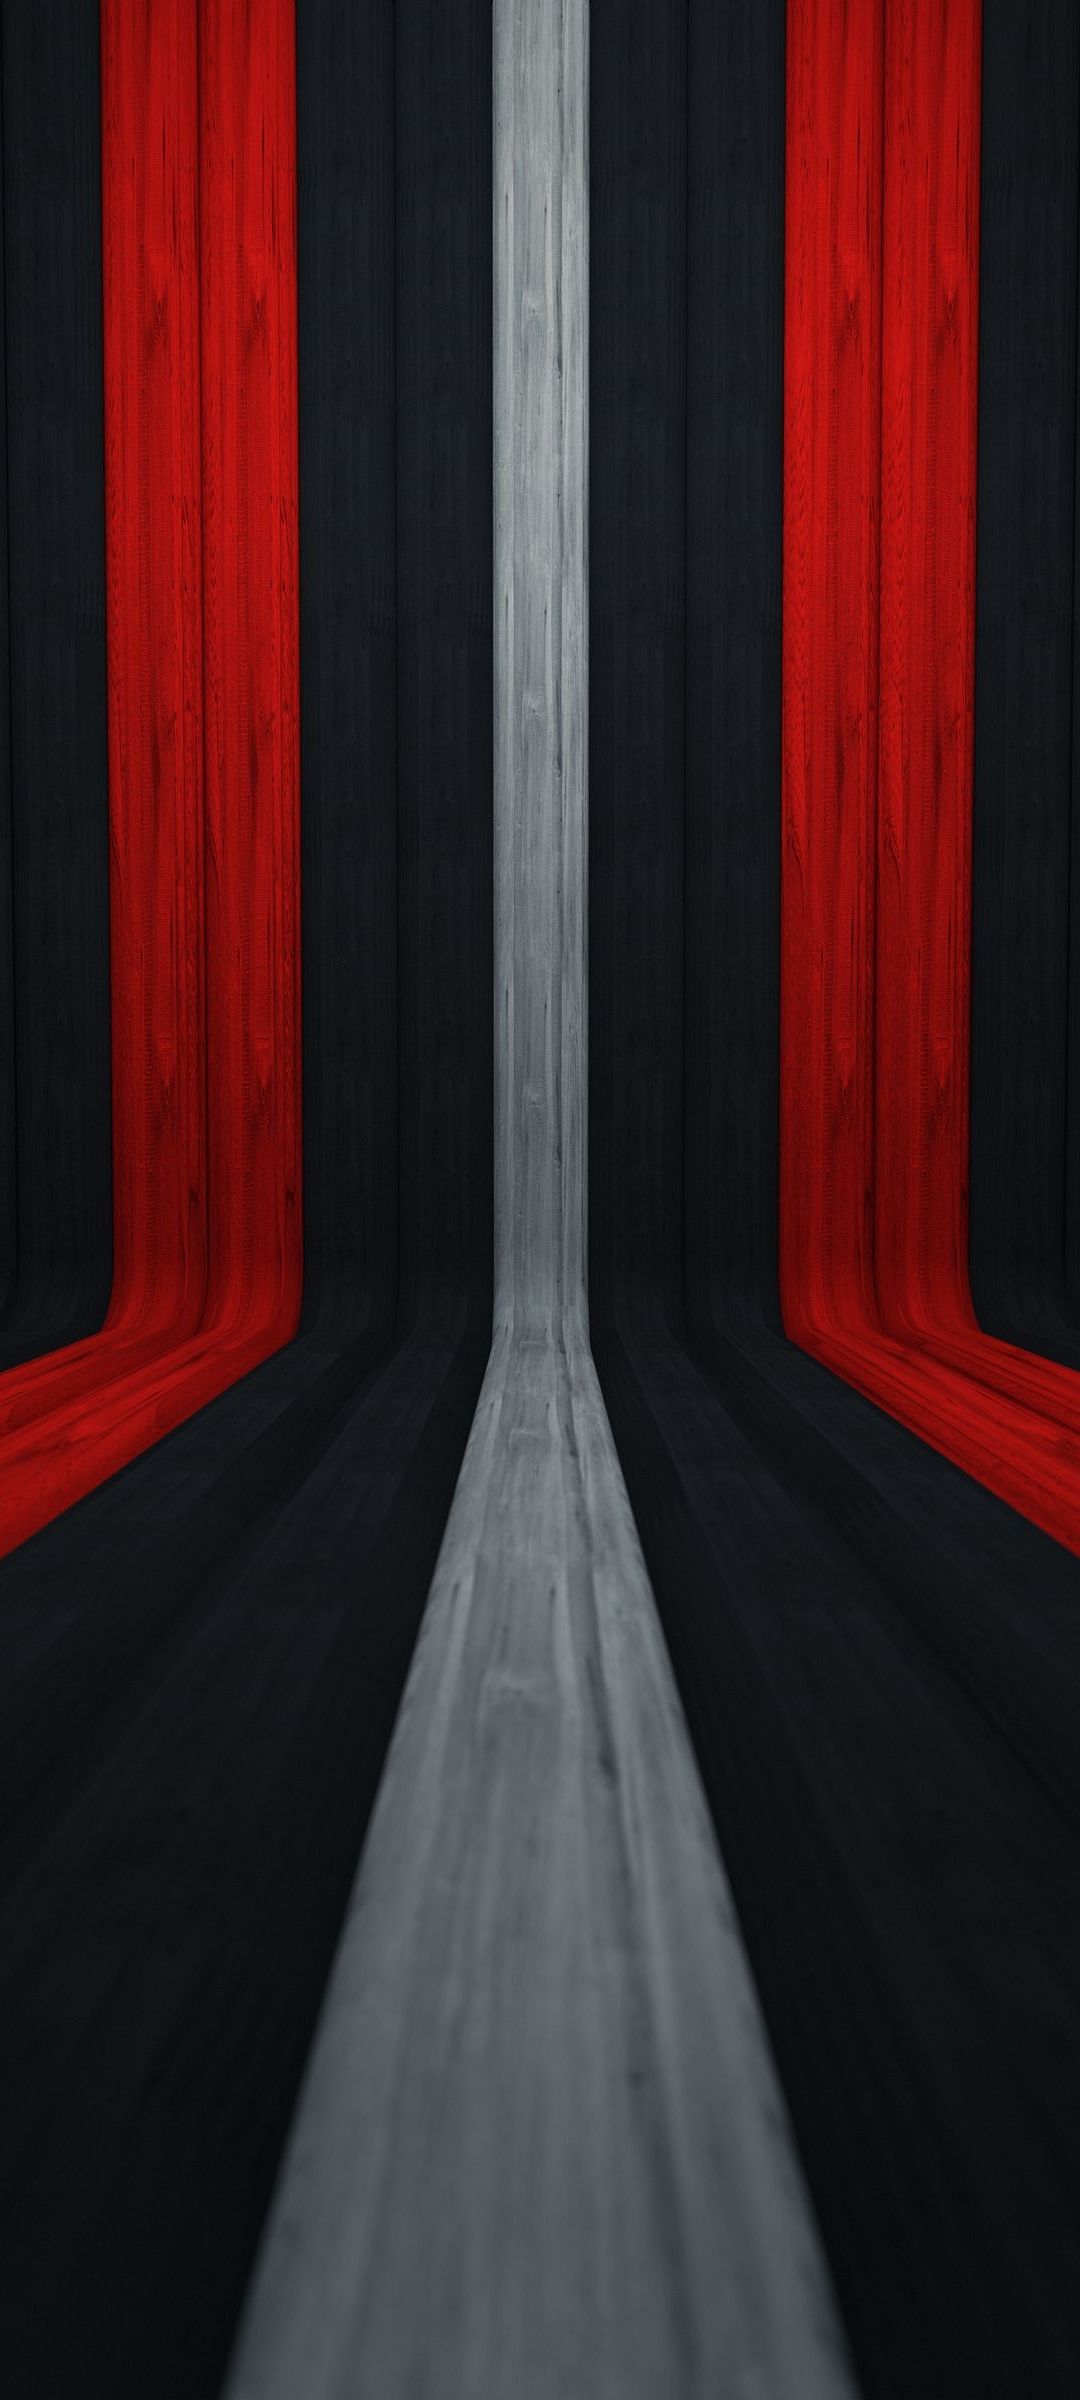 3d Wallpaper Black And Red Image Num 92